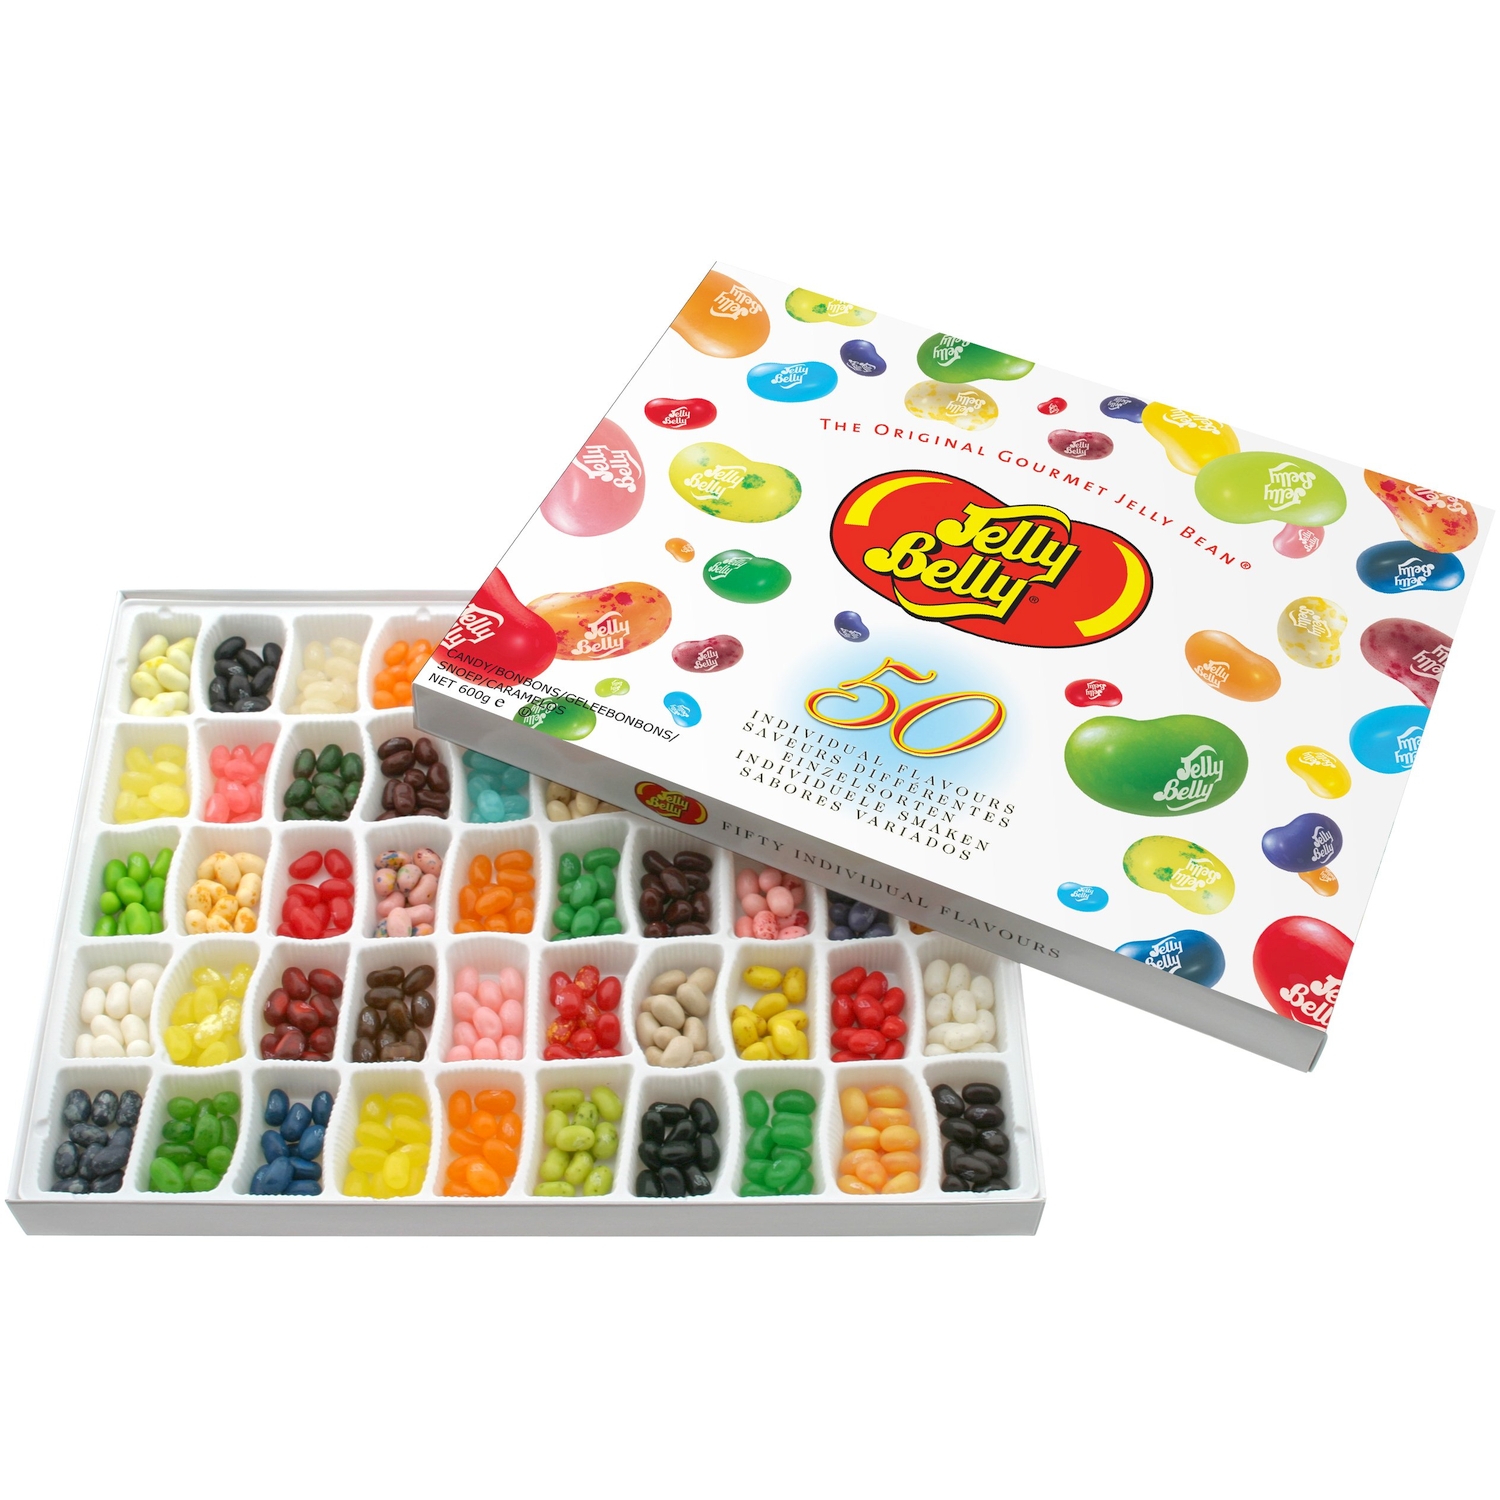     50   Best Official Flavour, 600  (Jelly Belly 74801)